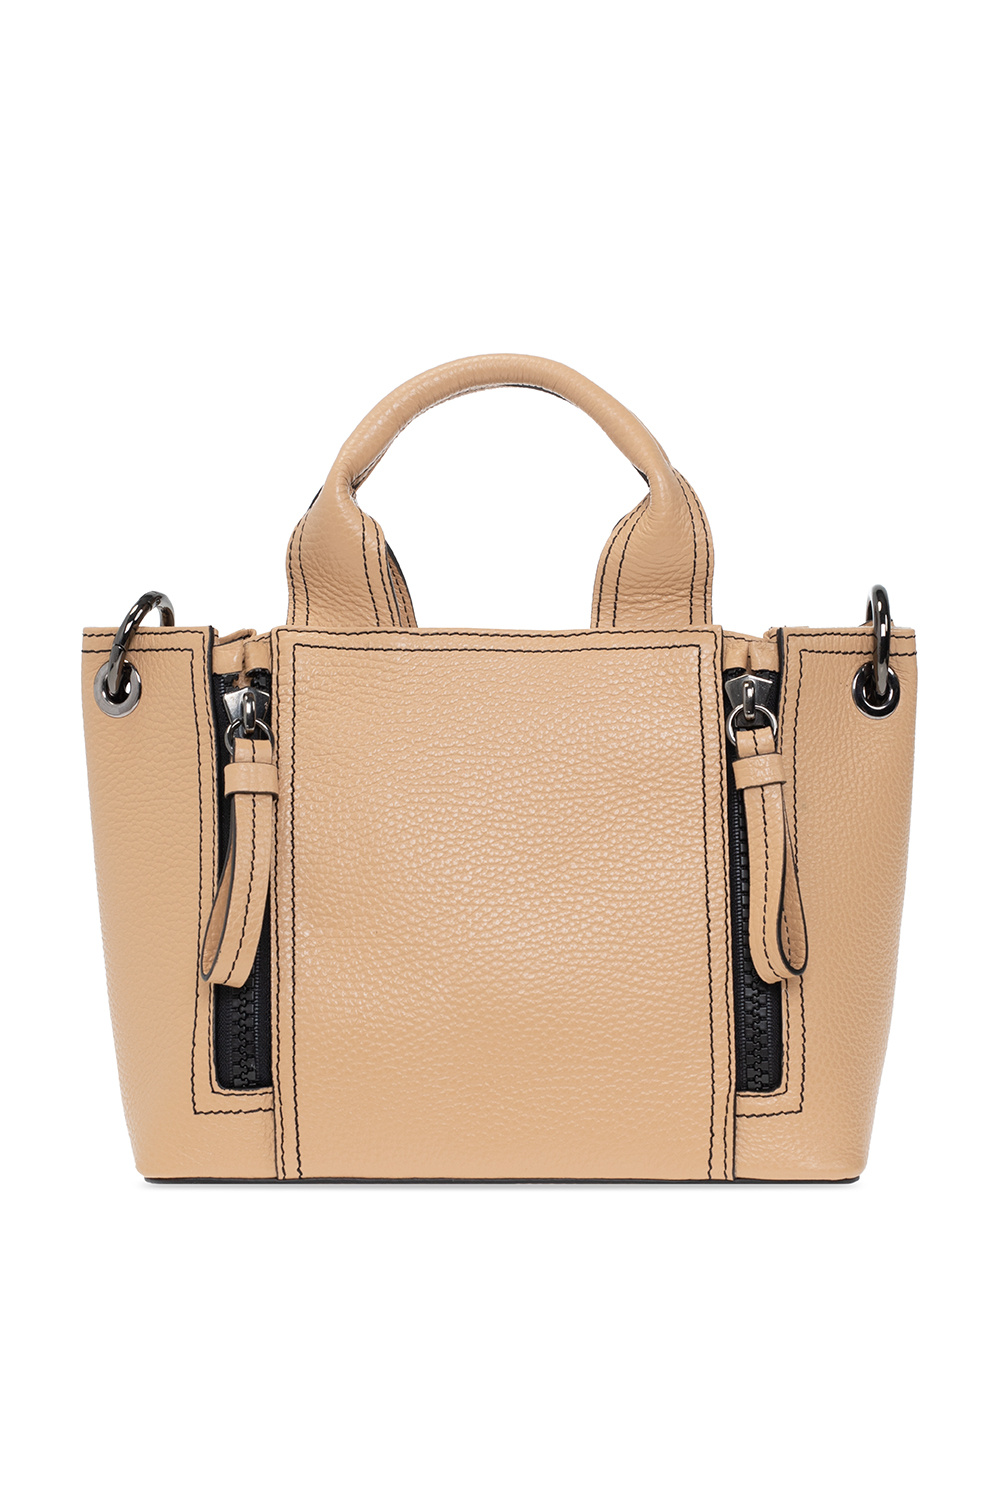 Iceberg brings you the Eva Large Tote studded bag that keeps all your belongings safe and protected